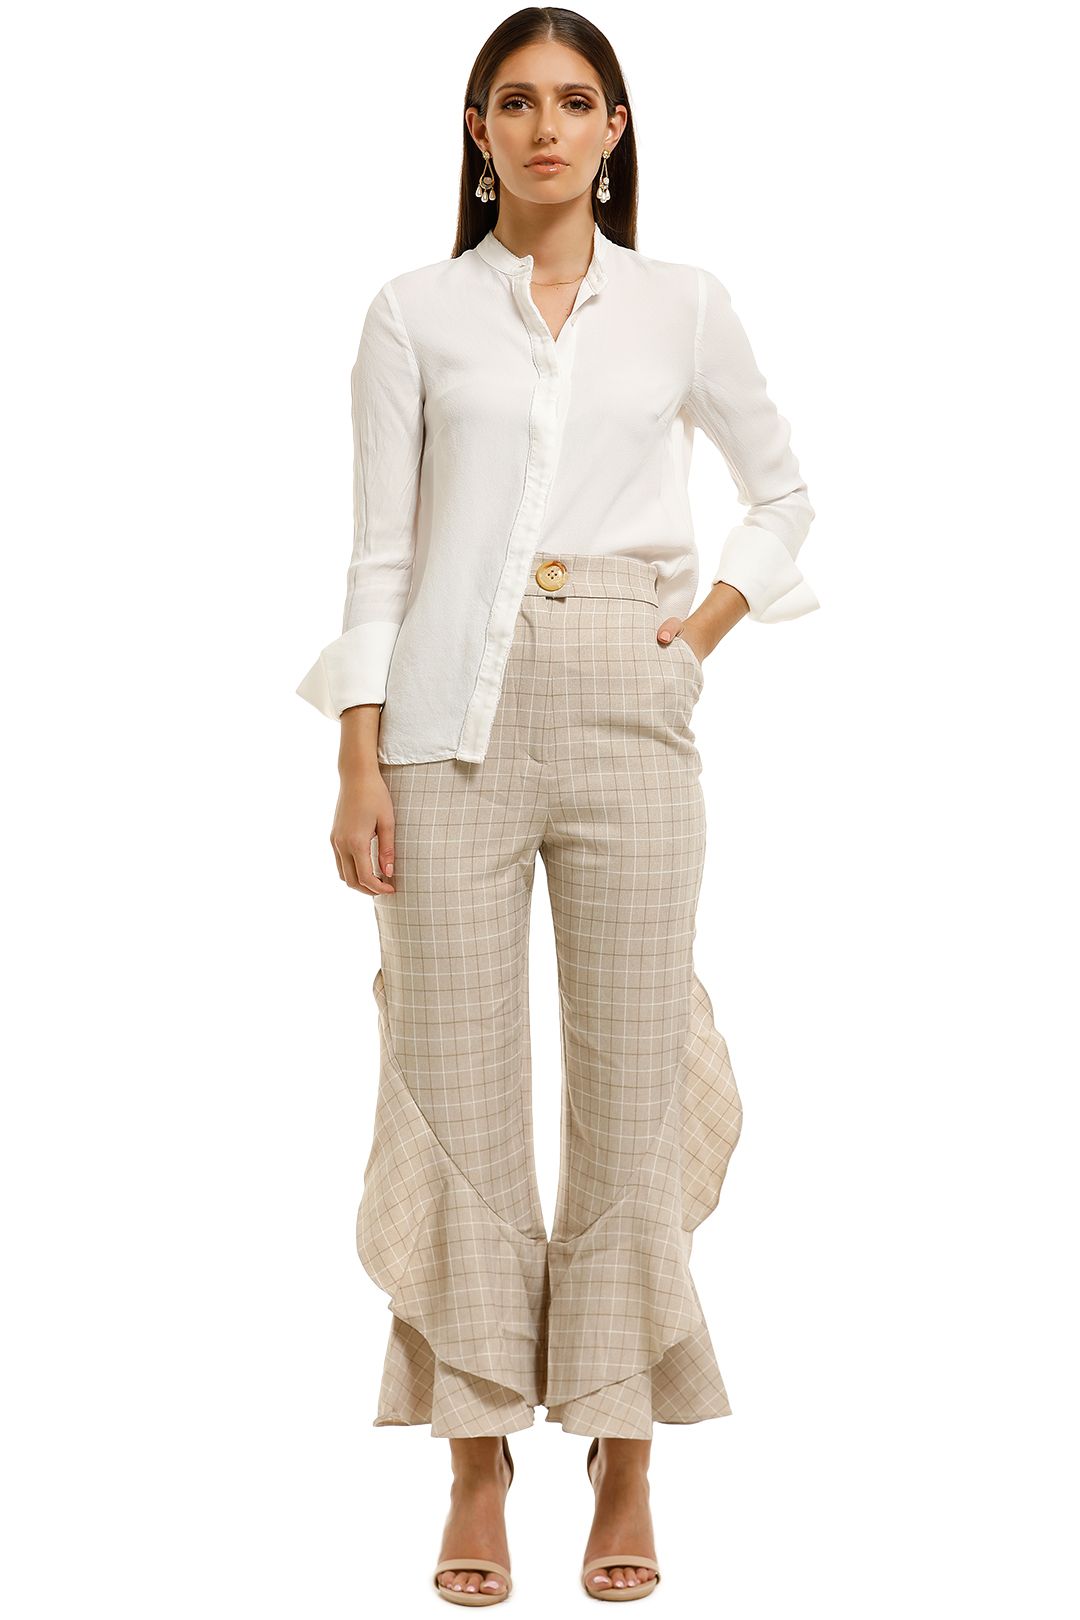 Keepsake-the-Label-Unison-Pant-Toffee-Check-Front